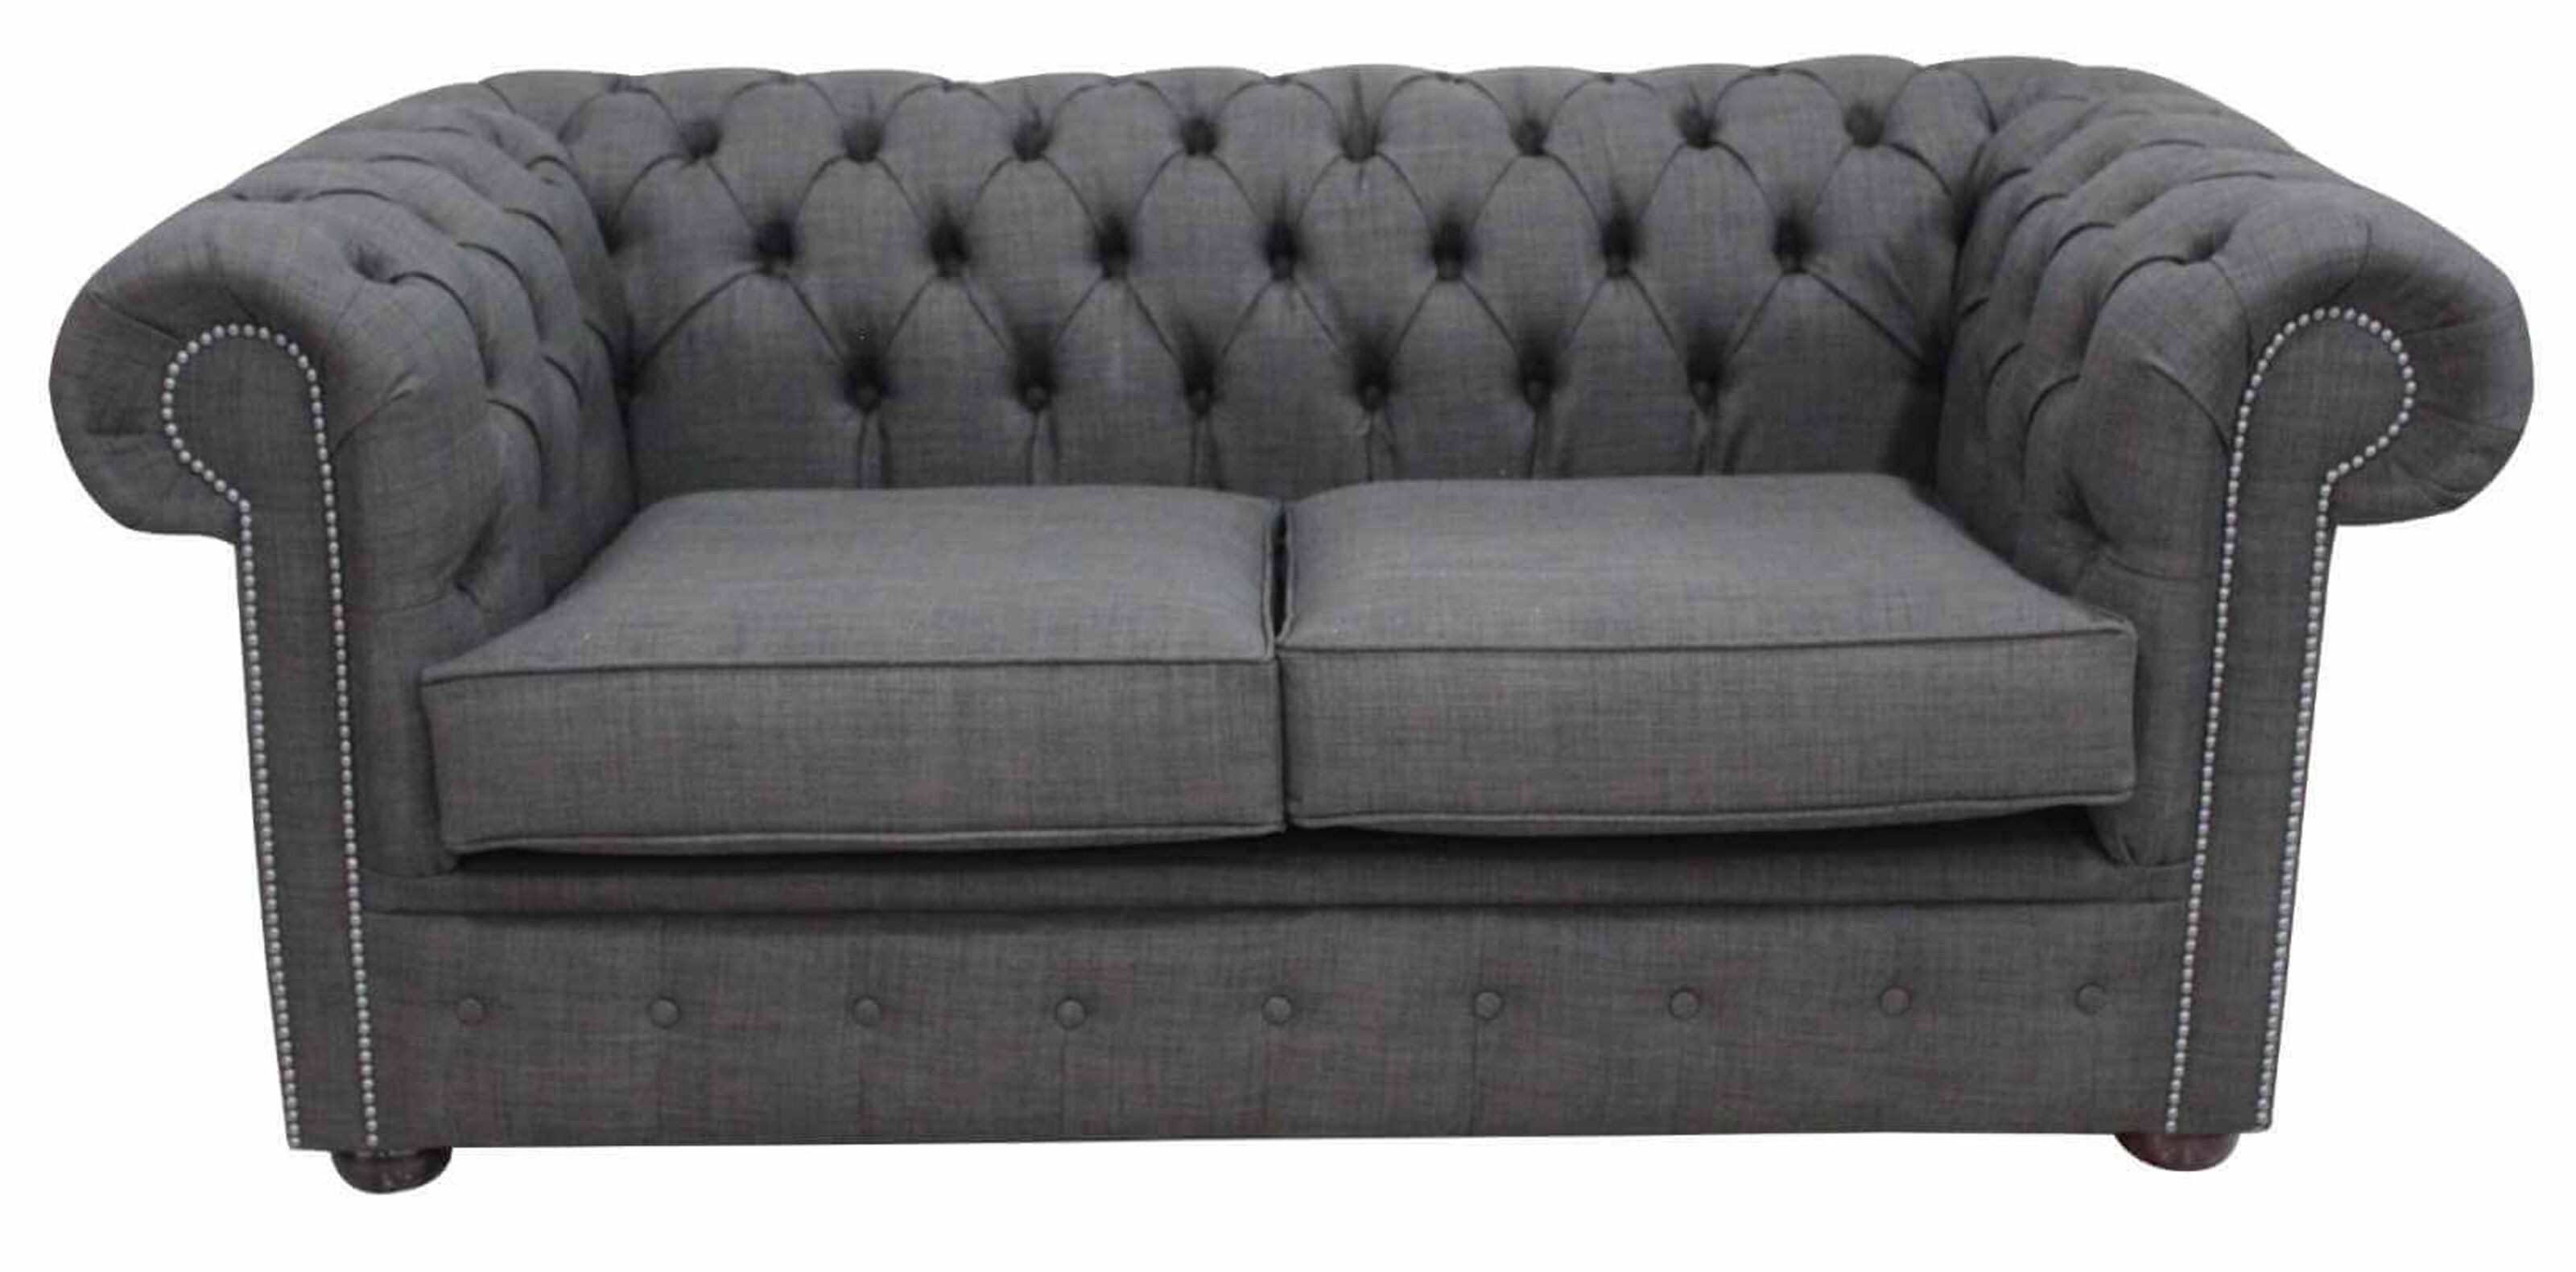 French Flair Embracing Chesterfield Sofas in France  %Post Title